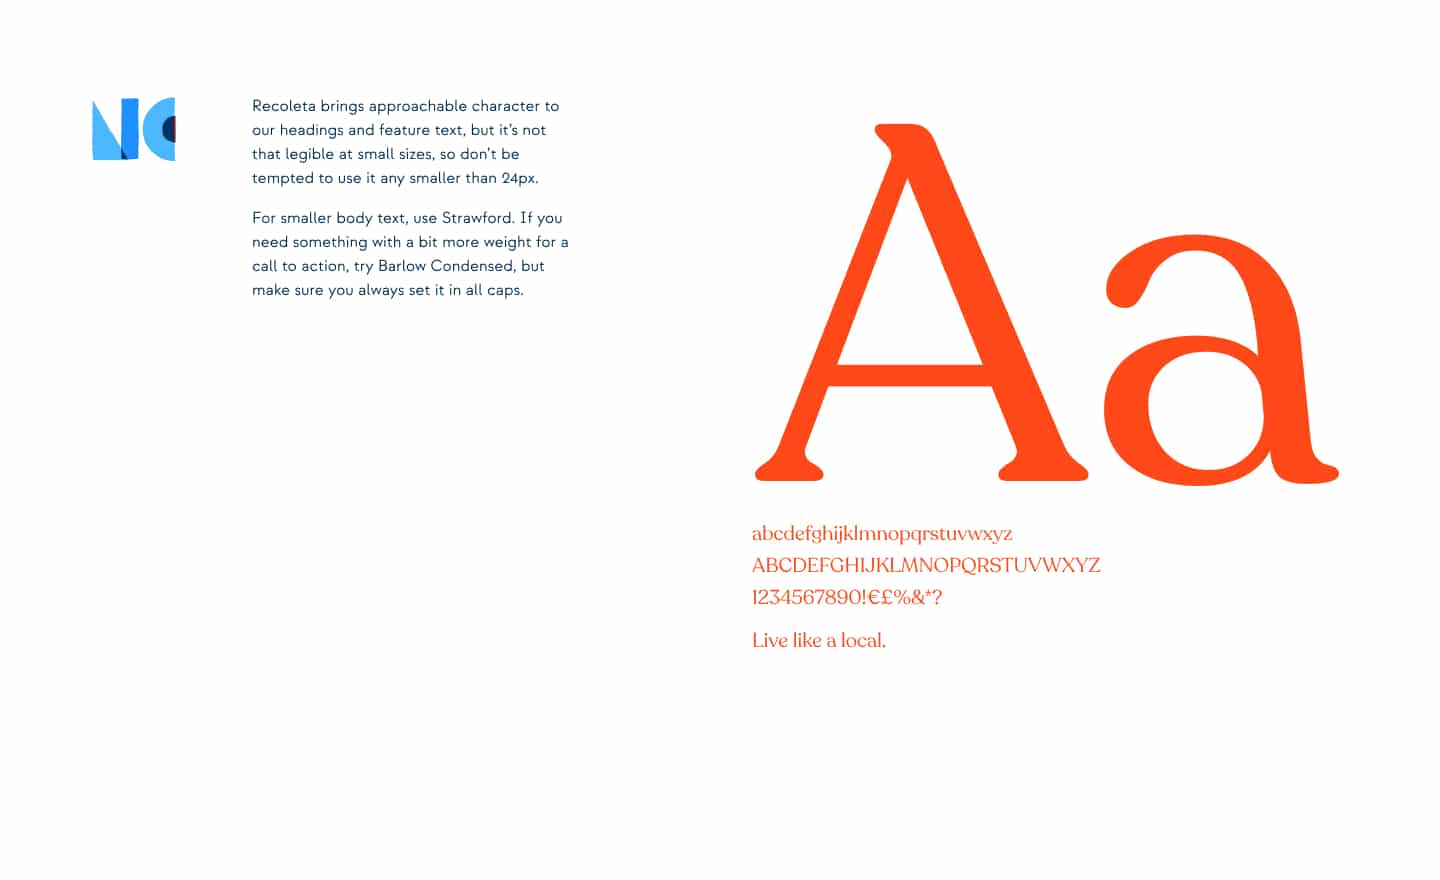 Another page from the guidelines, showing some typeface specs for the primary brand font, Recoleta, which is a soft, modern semi-sans.